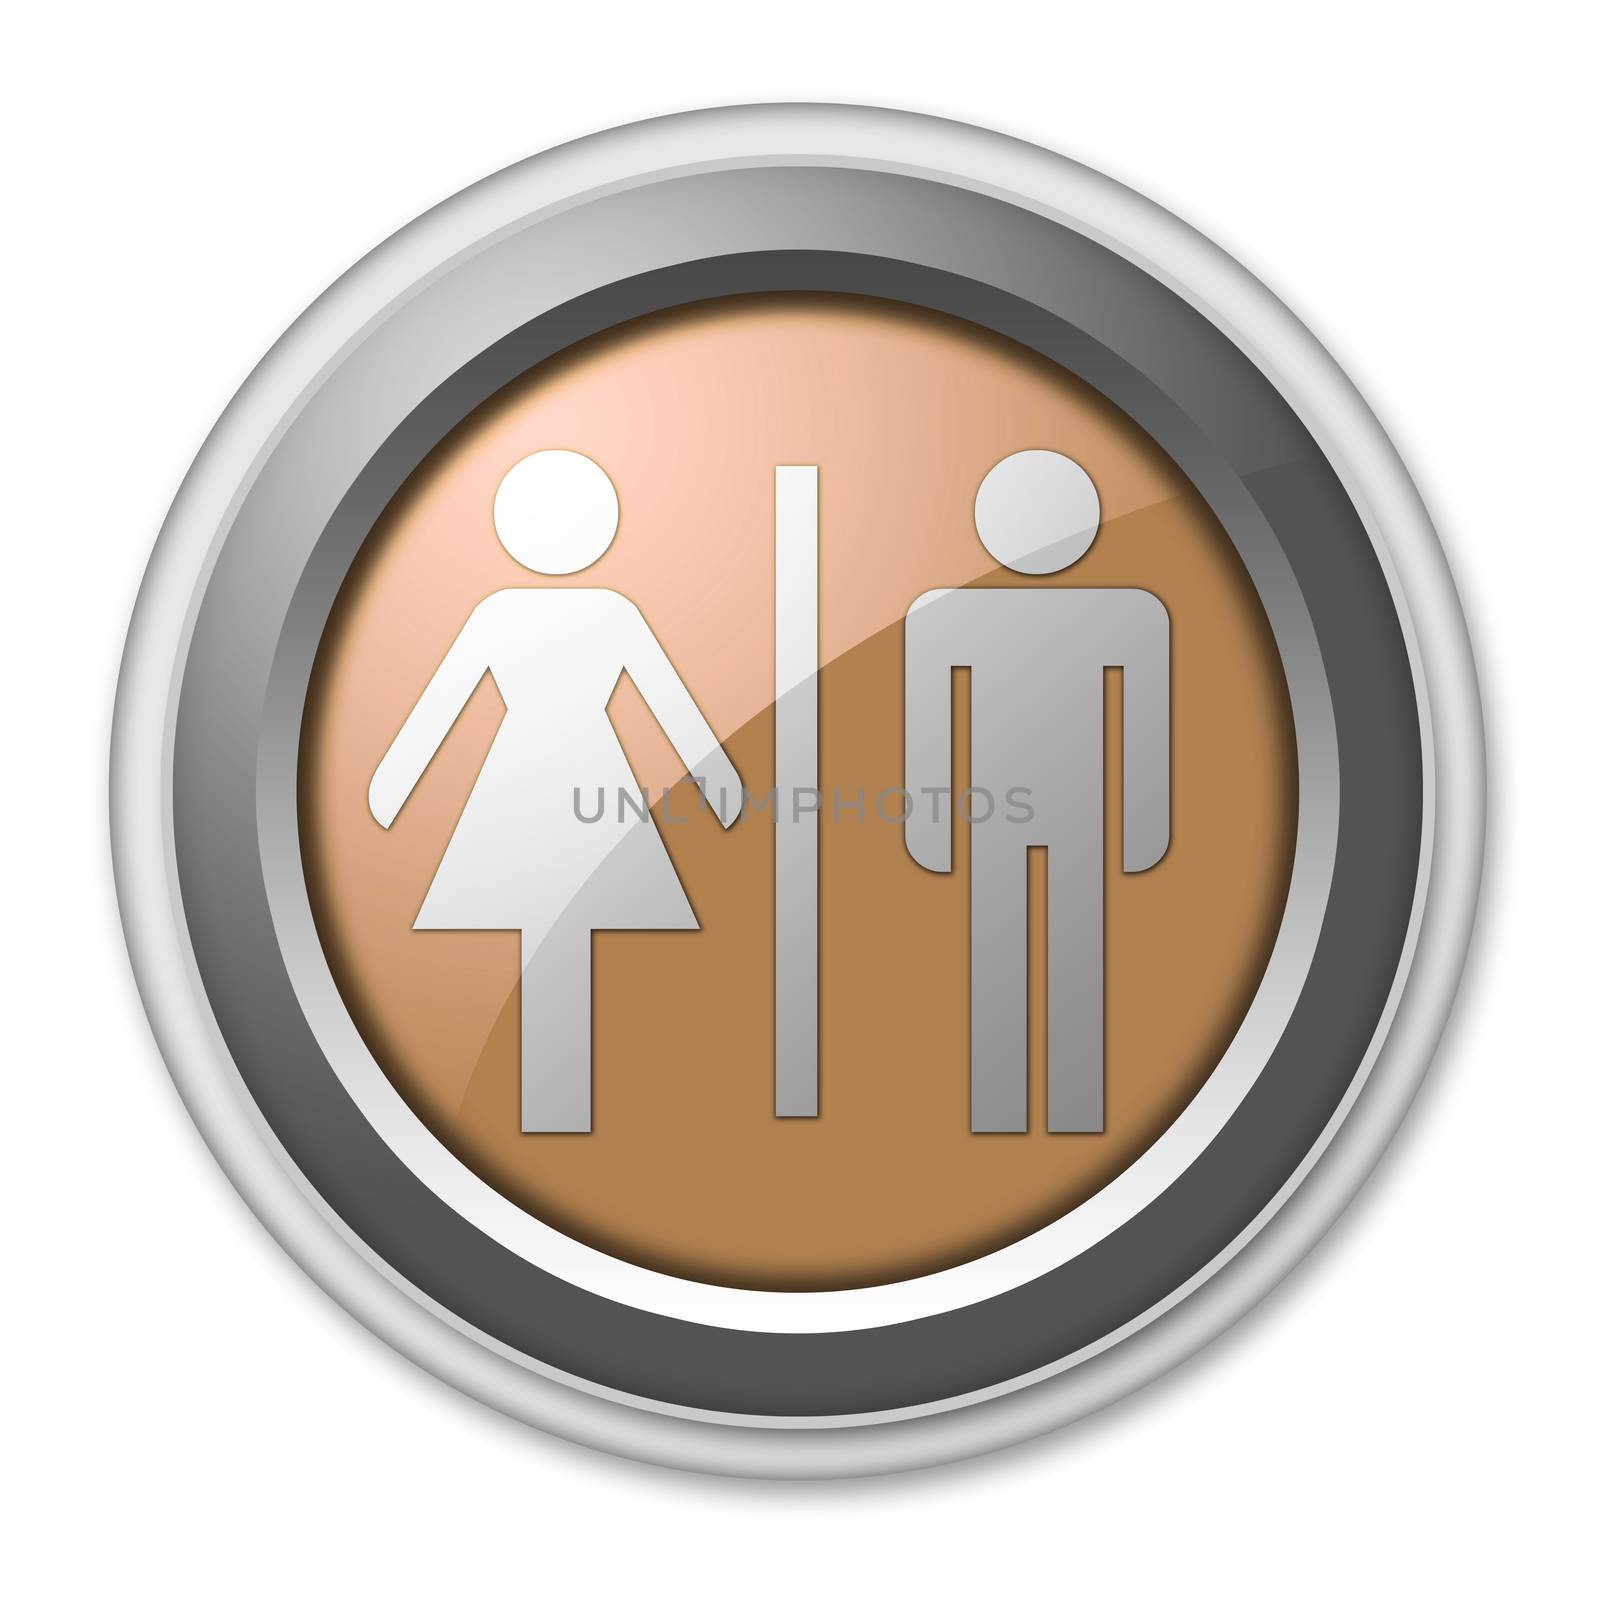 Icon, Button, Pictogram Restrooms by mindscanner